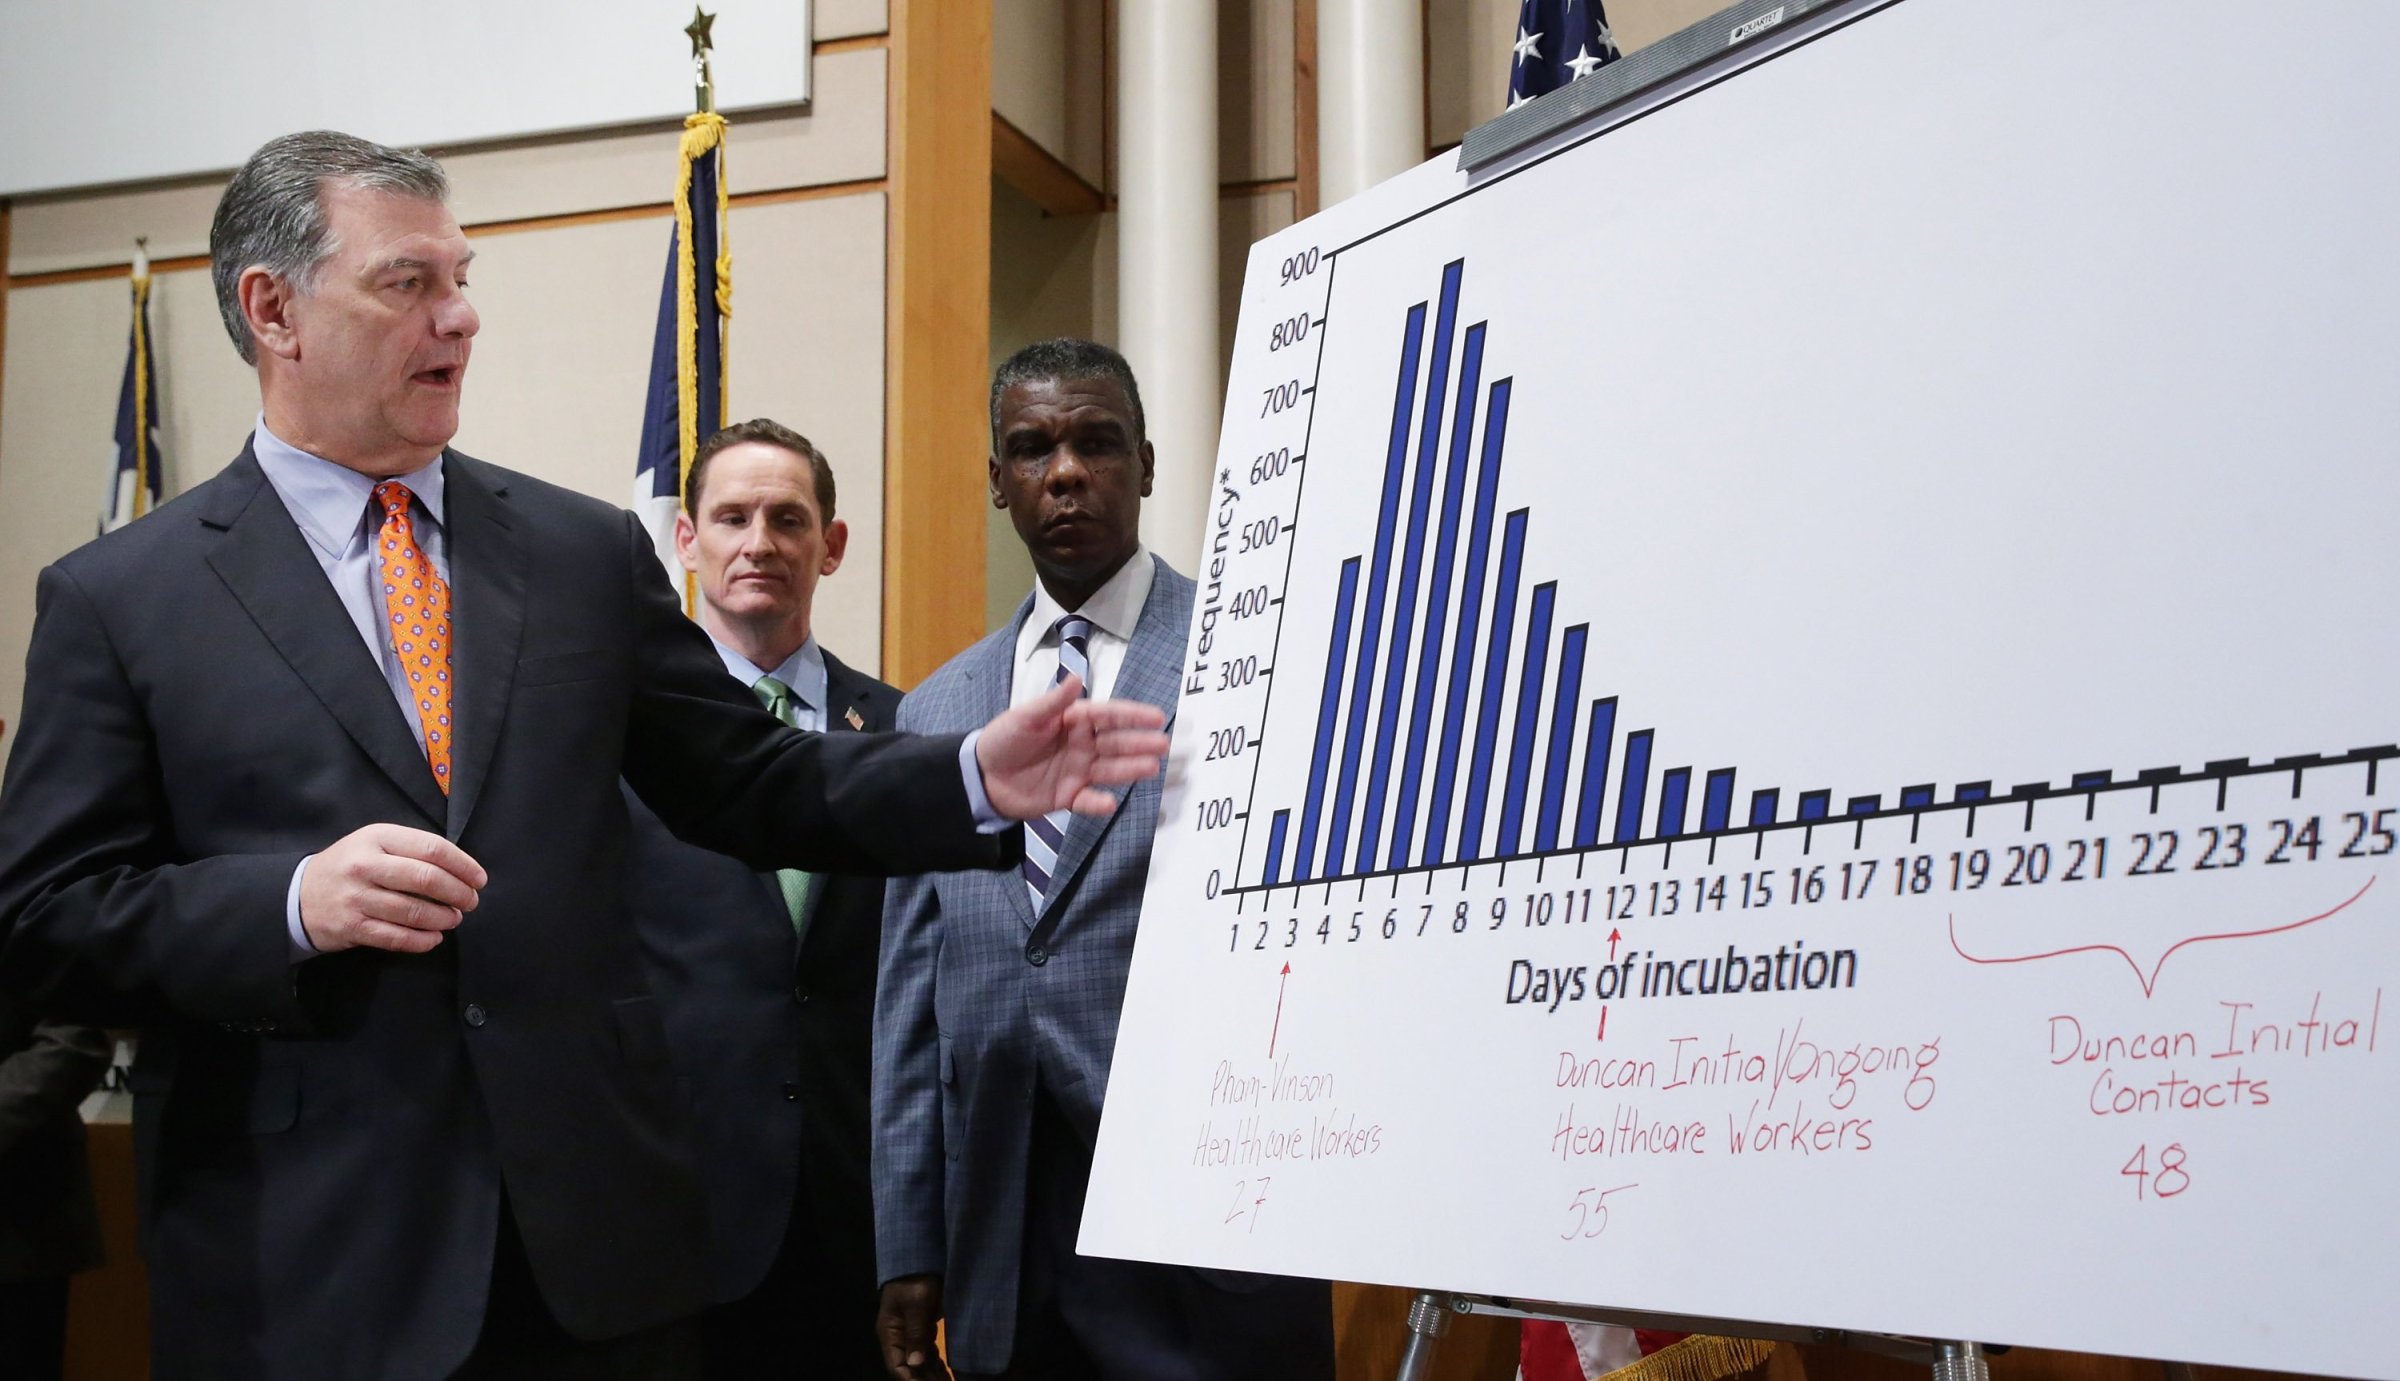 Mayor Mike Rawlings speaks during a news conference about the recent Ebola infections with Dallas County Judge Clay Jenkins and Dallas County Health and Human Services Director Zachary Thompson at the Dallas County Administration Building on Oct. 20, 2014 in Dallas.